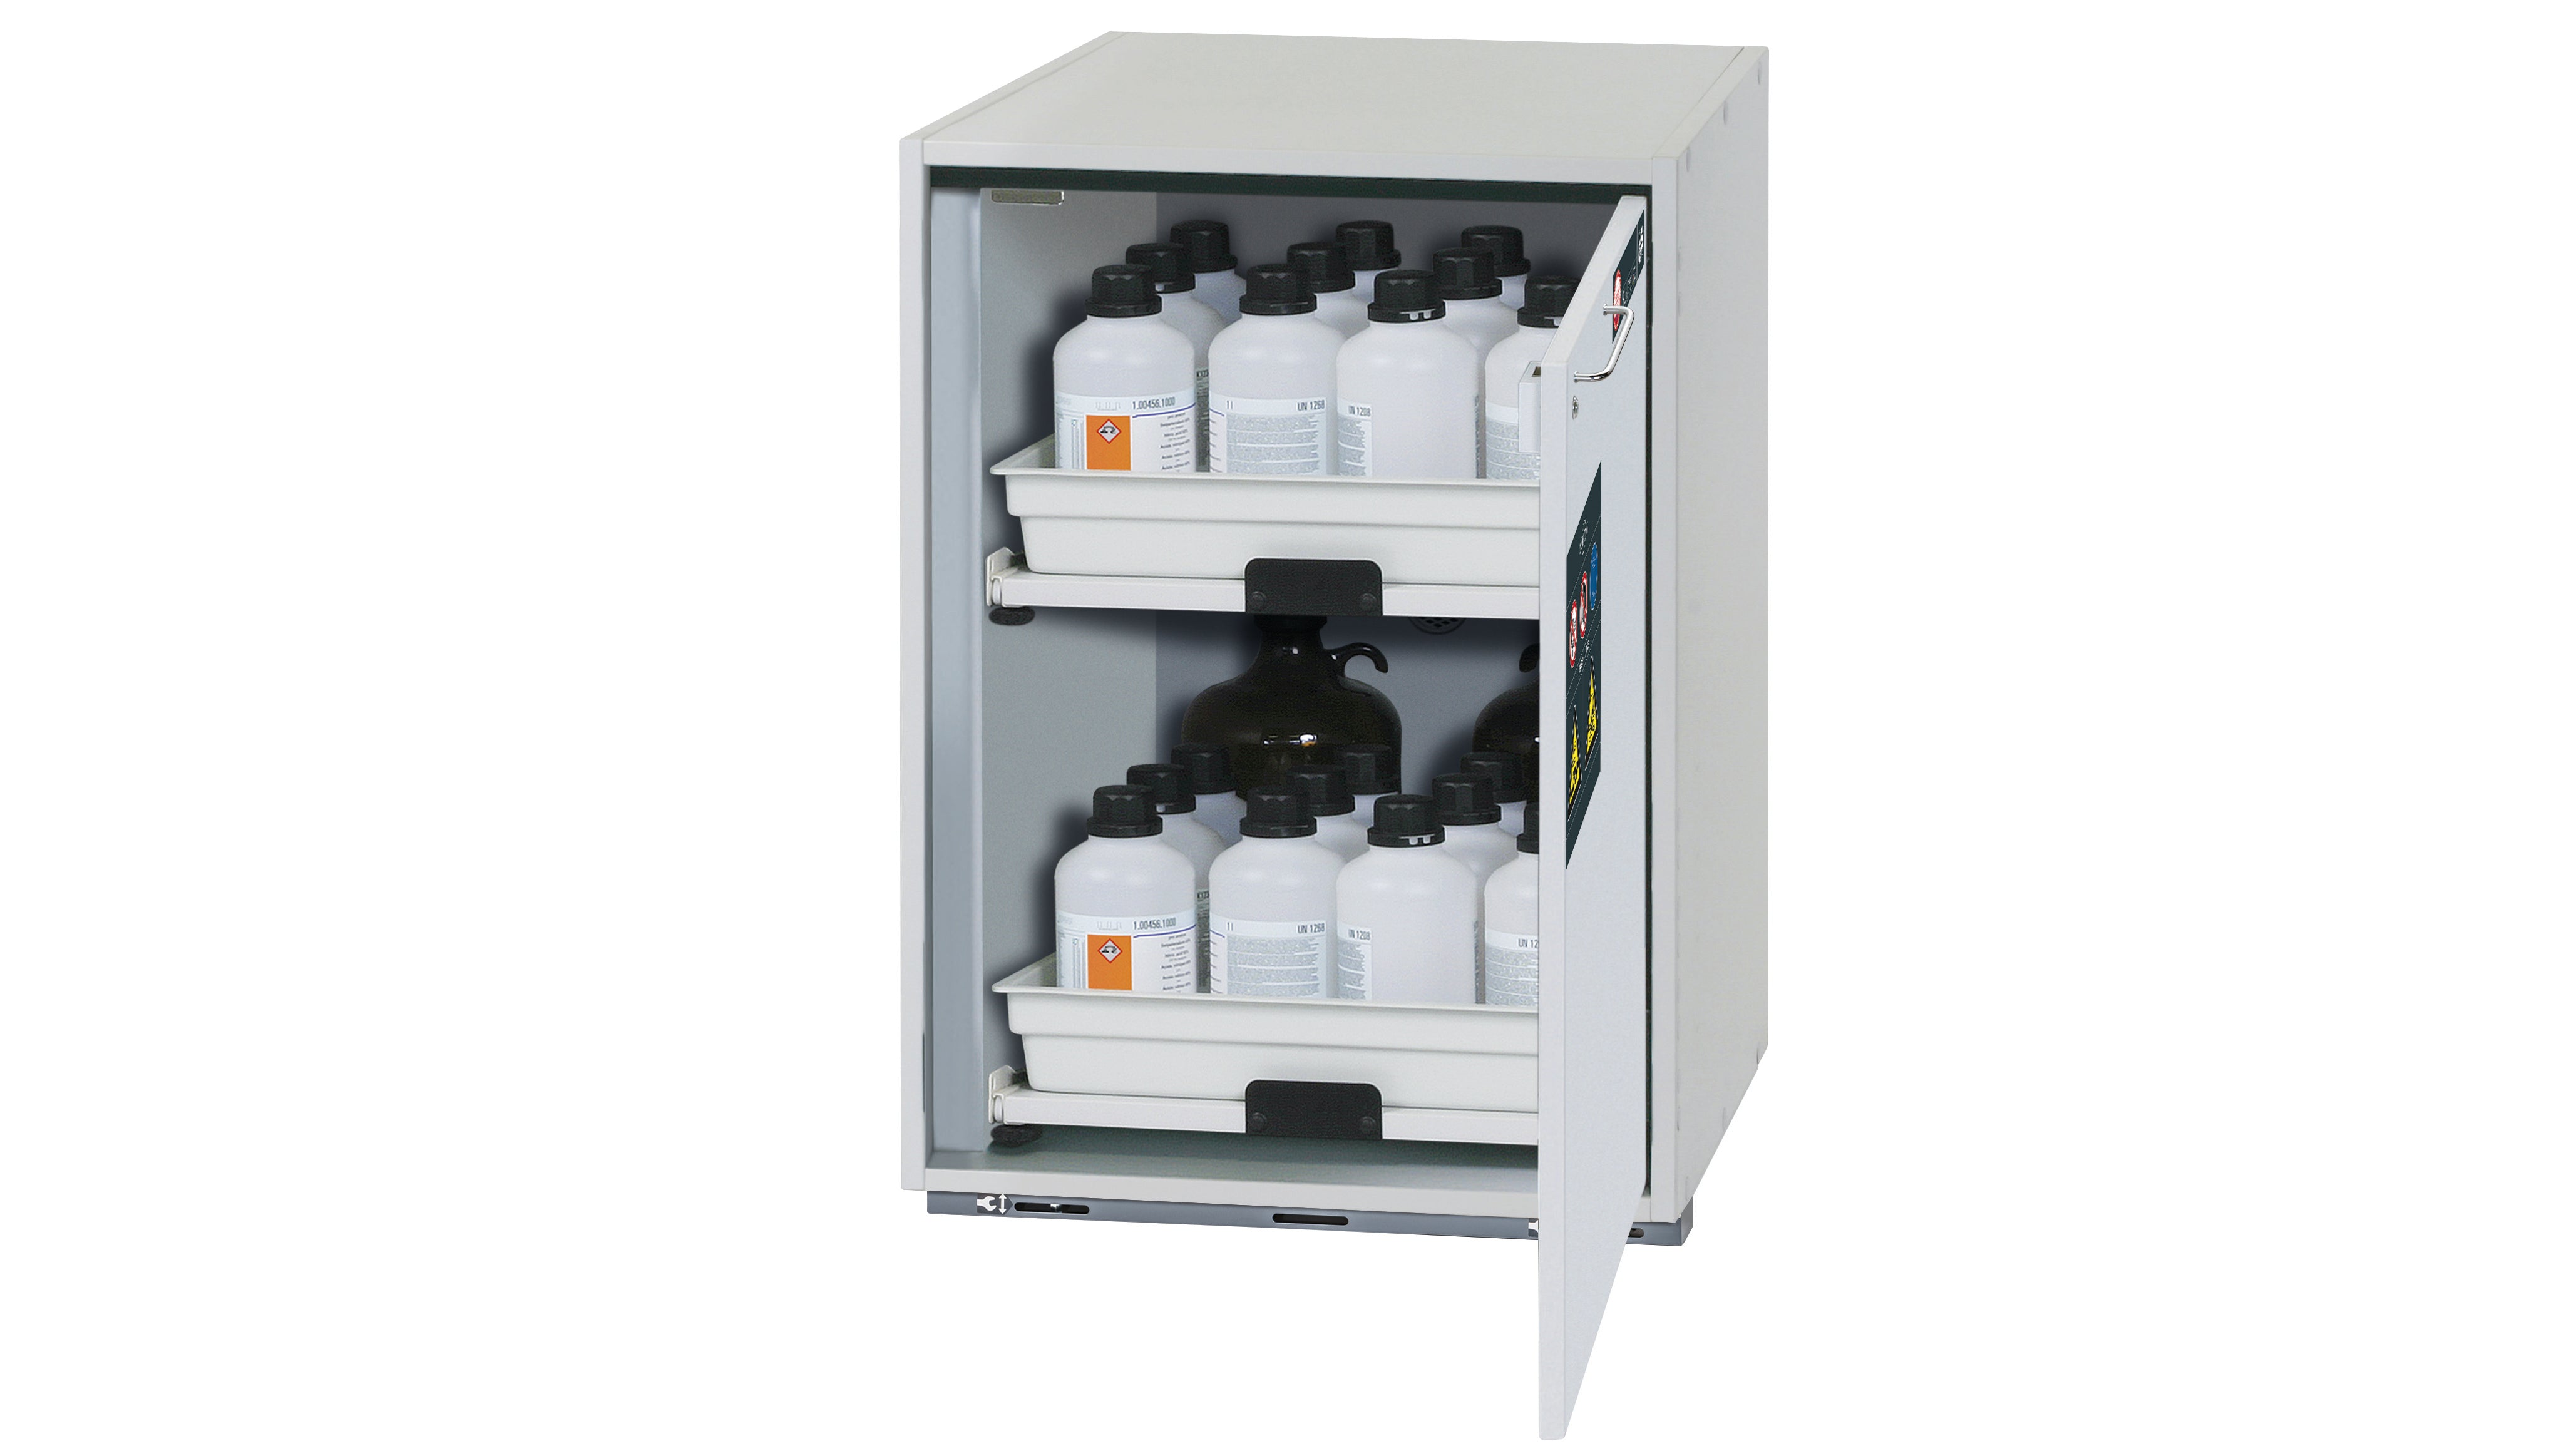 Acid and alkali base cabinet SL-CLASSIC-UB model SL.080.059.UB.TR in light gray with 2x AbZ shelf pull-out (FP plate/polypropylene)